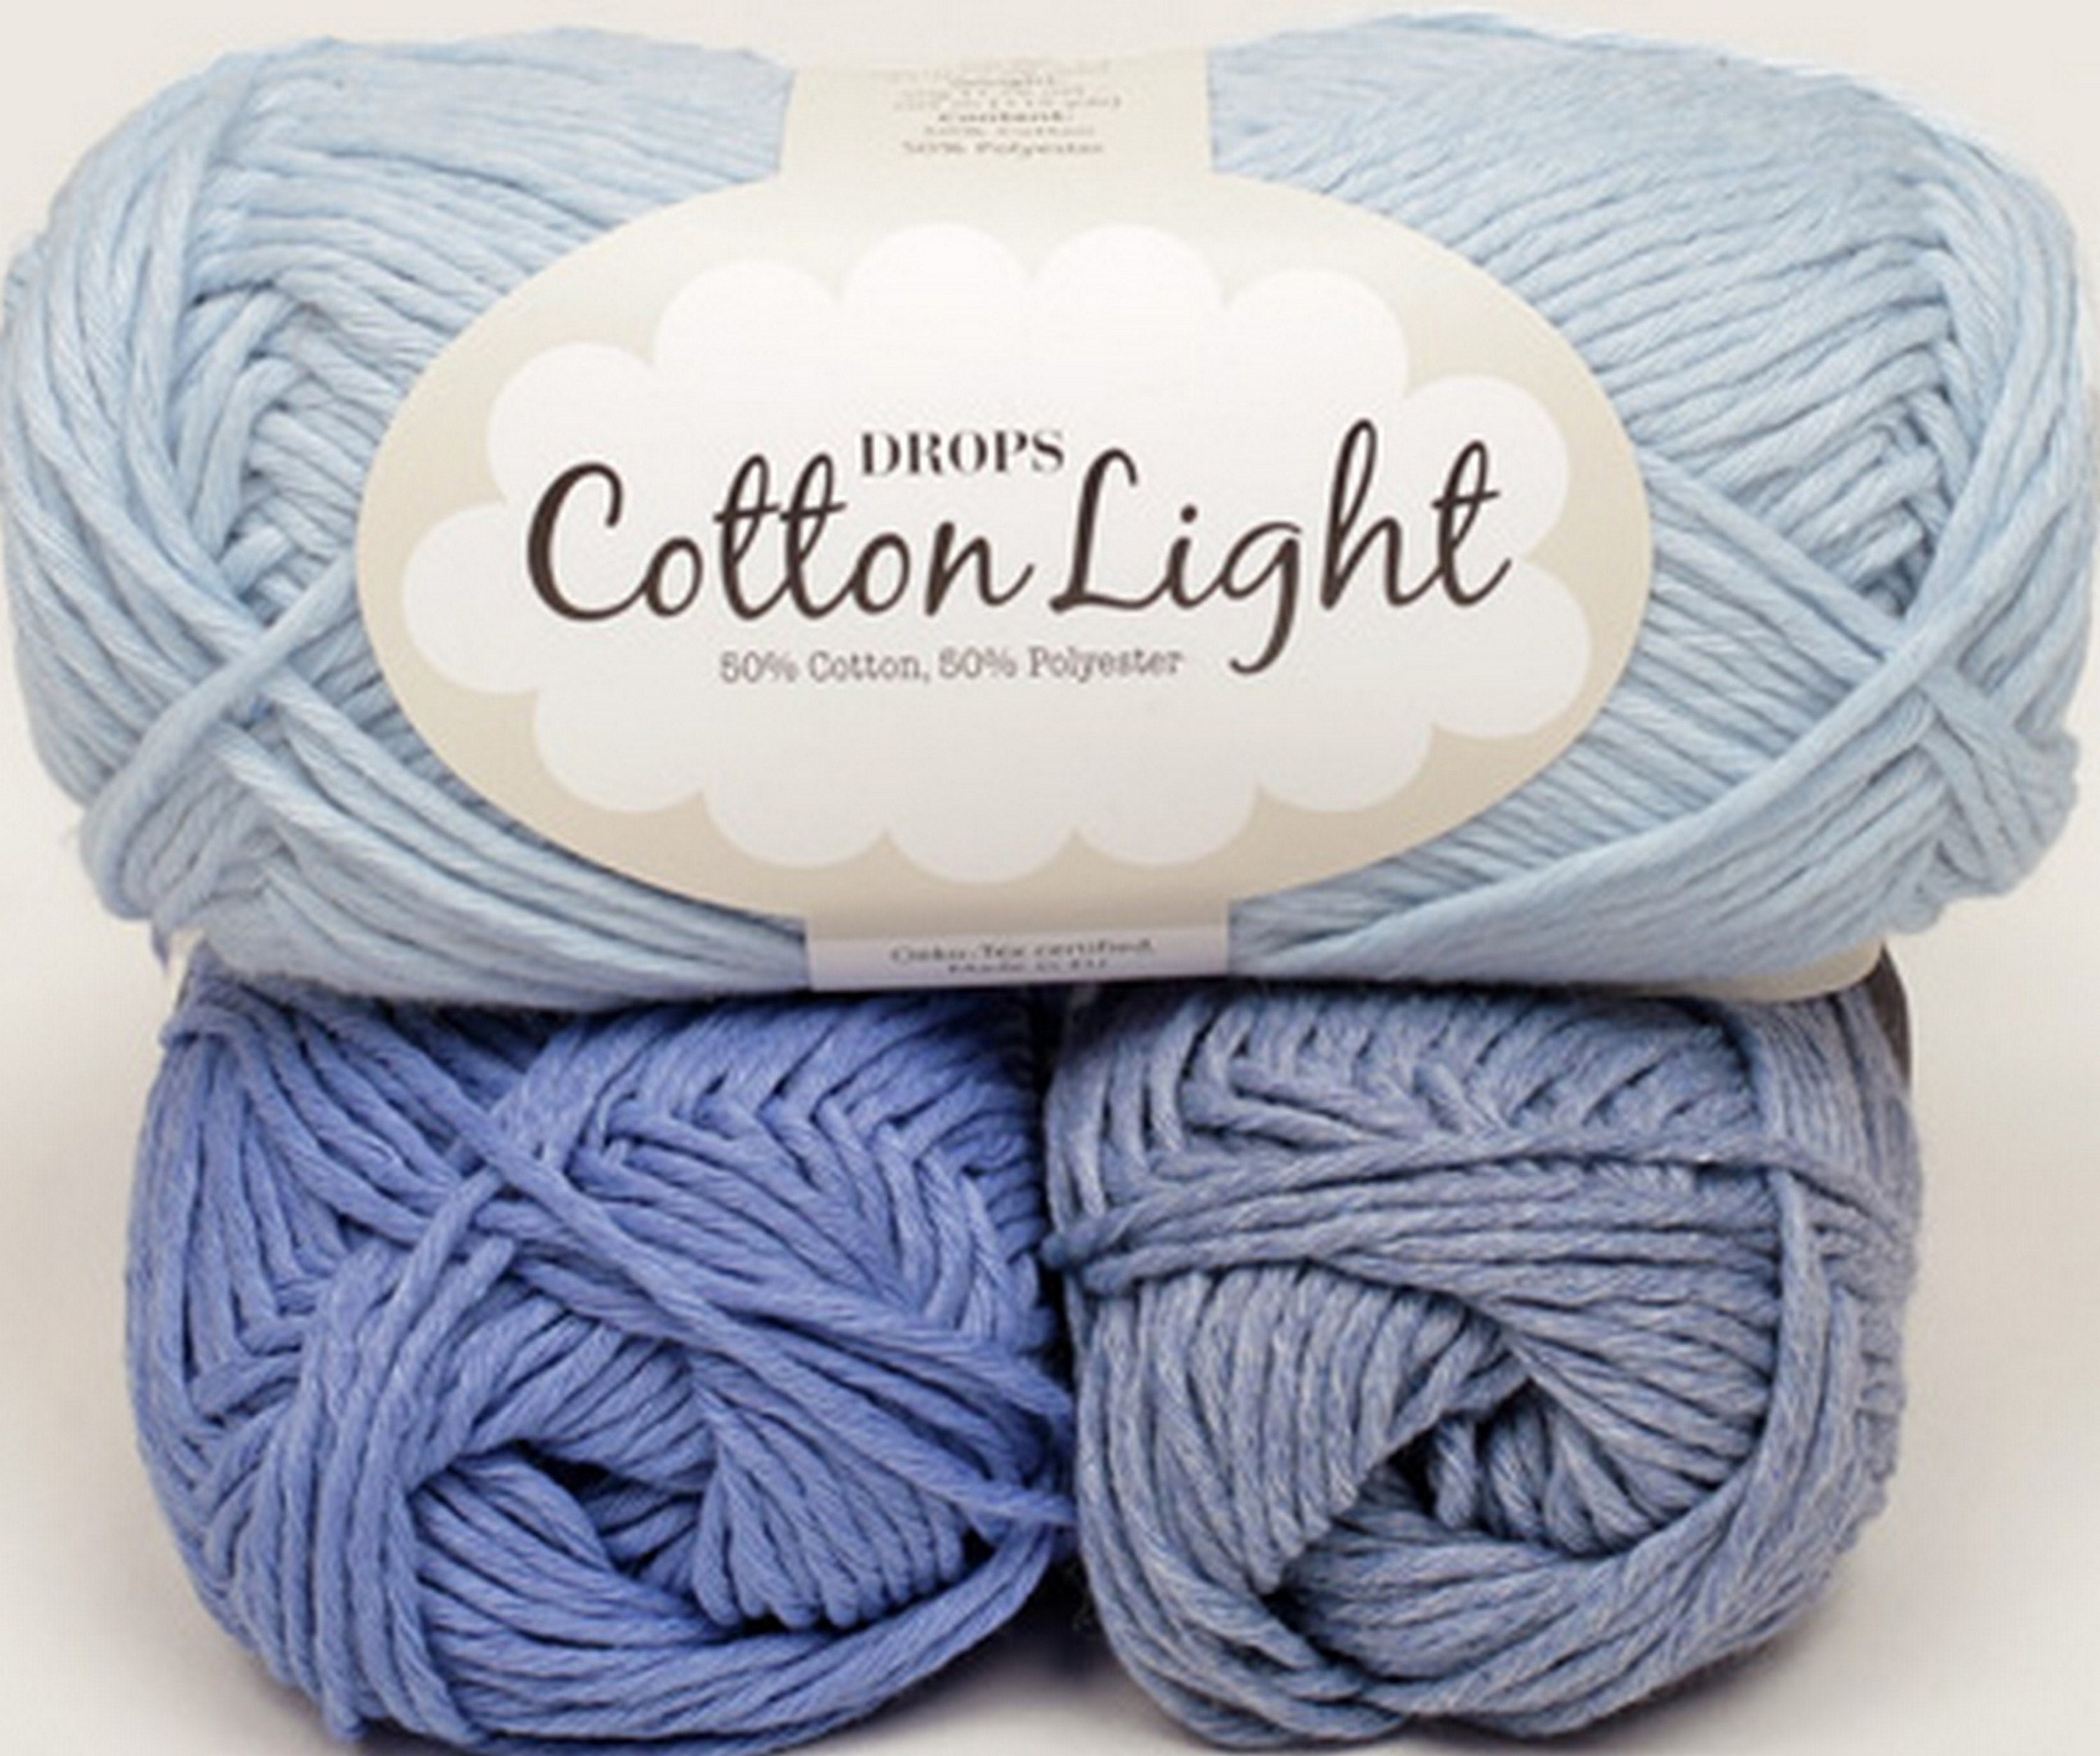 Drops Cotton Light A Cool Cotton Yarn For Summer Light Etsy